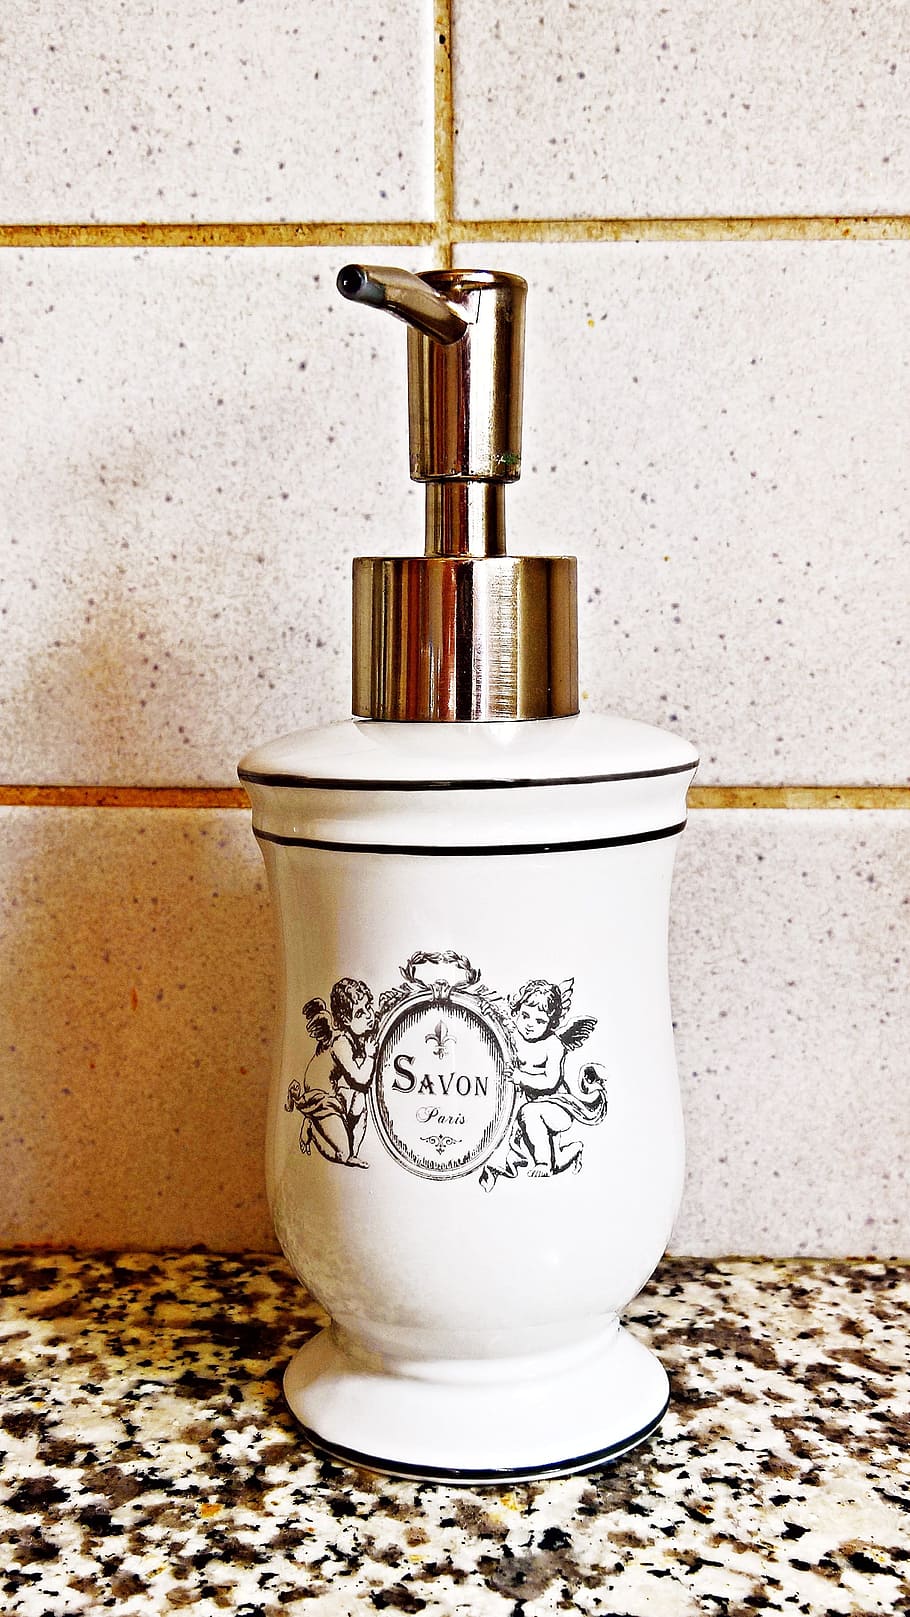 Soap Dispenser, French, Nostalgic, soap, liquid soap, cleaning, cleanliness, wash, hygiene, domestic Bathroom